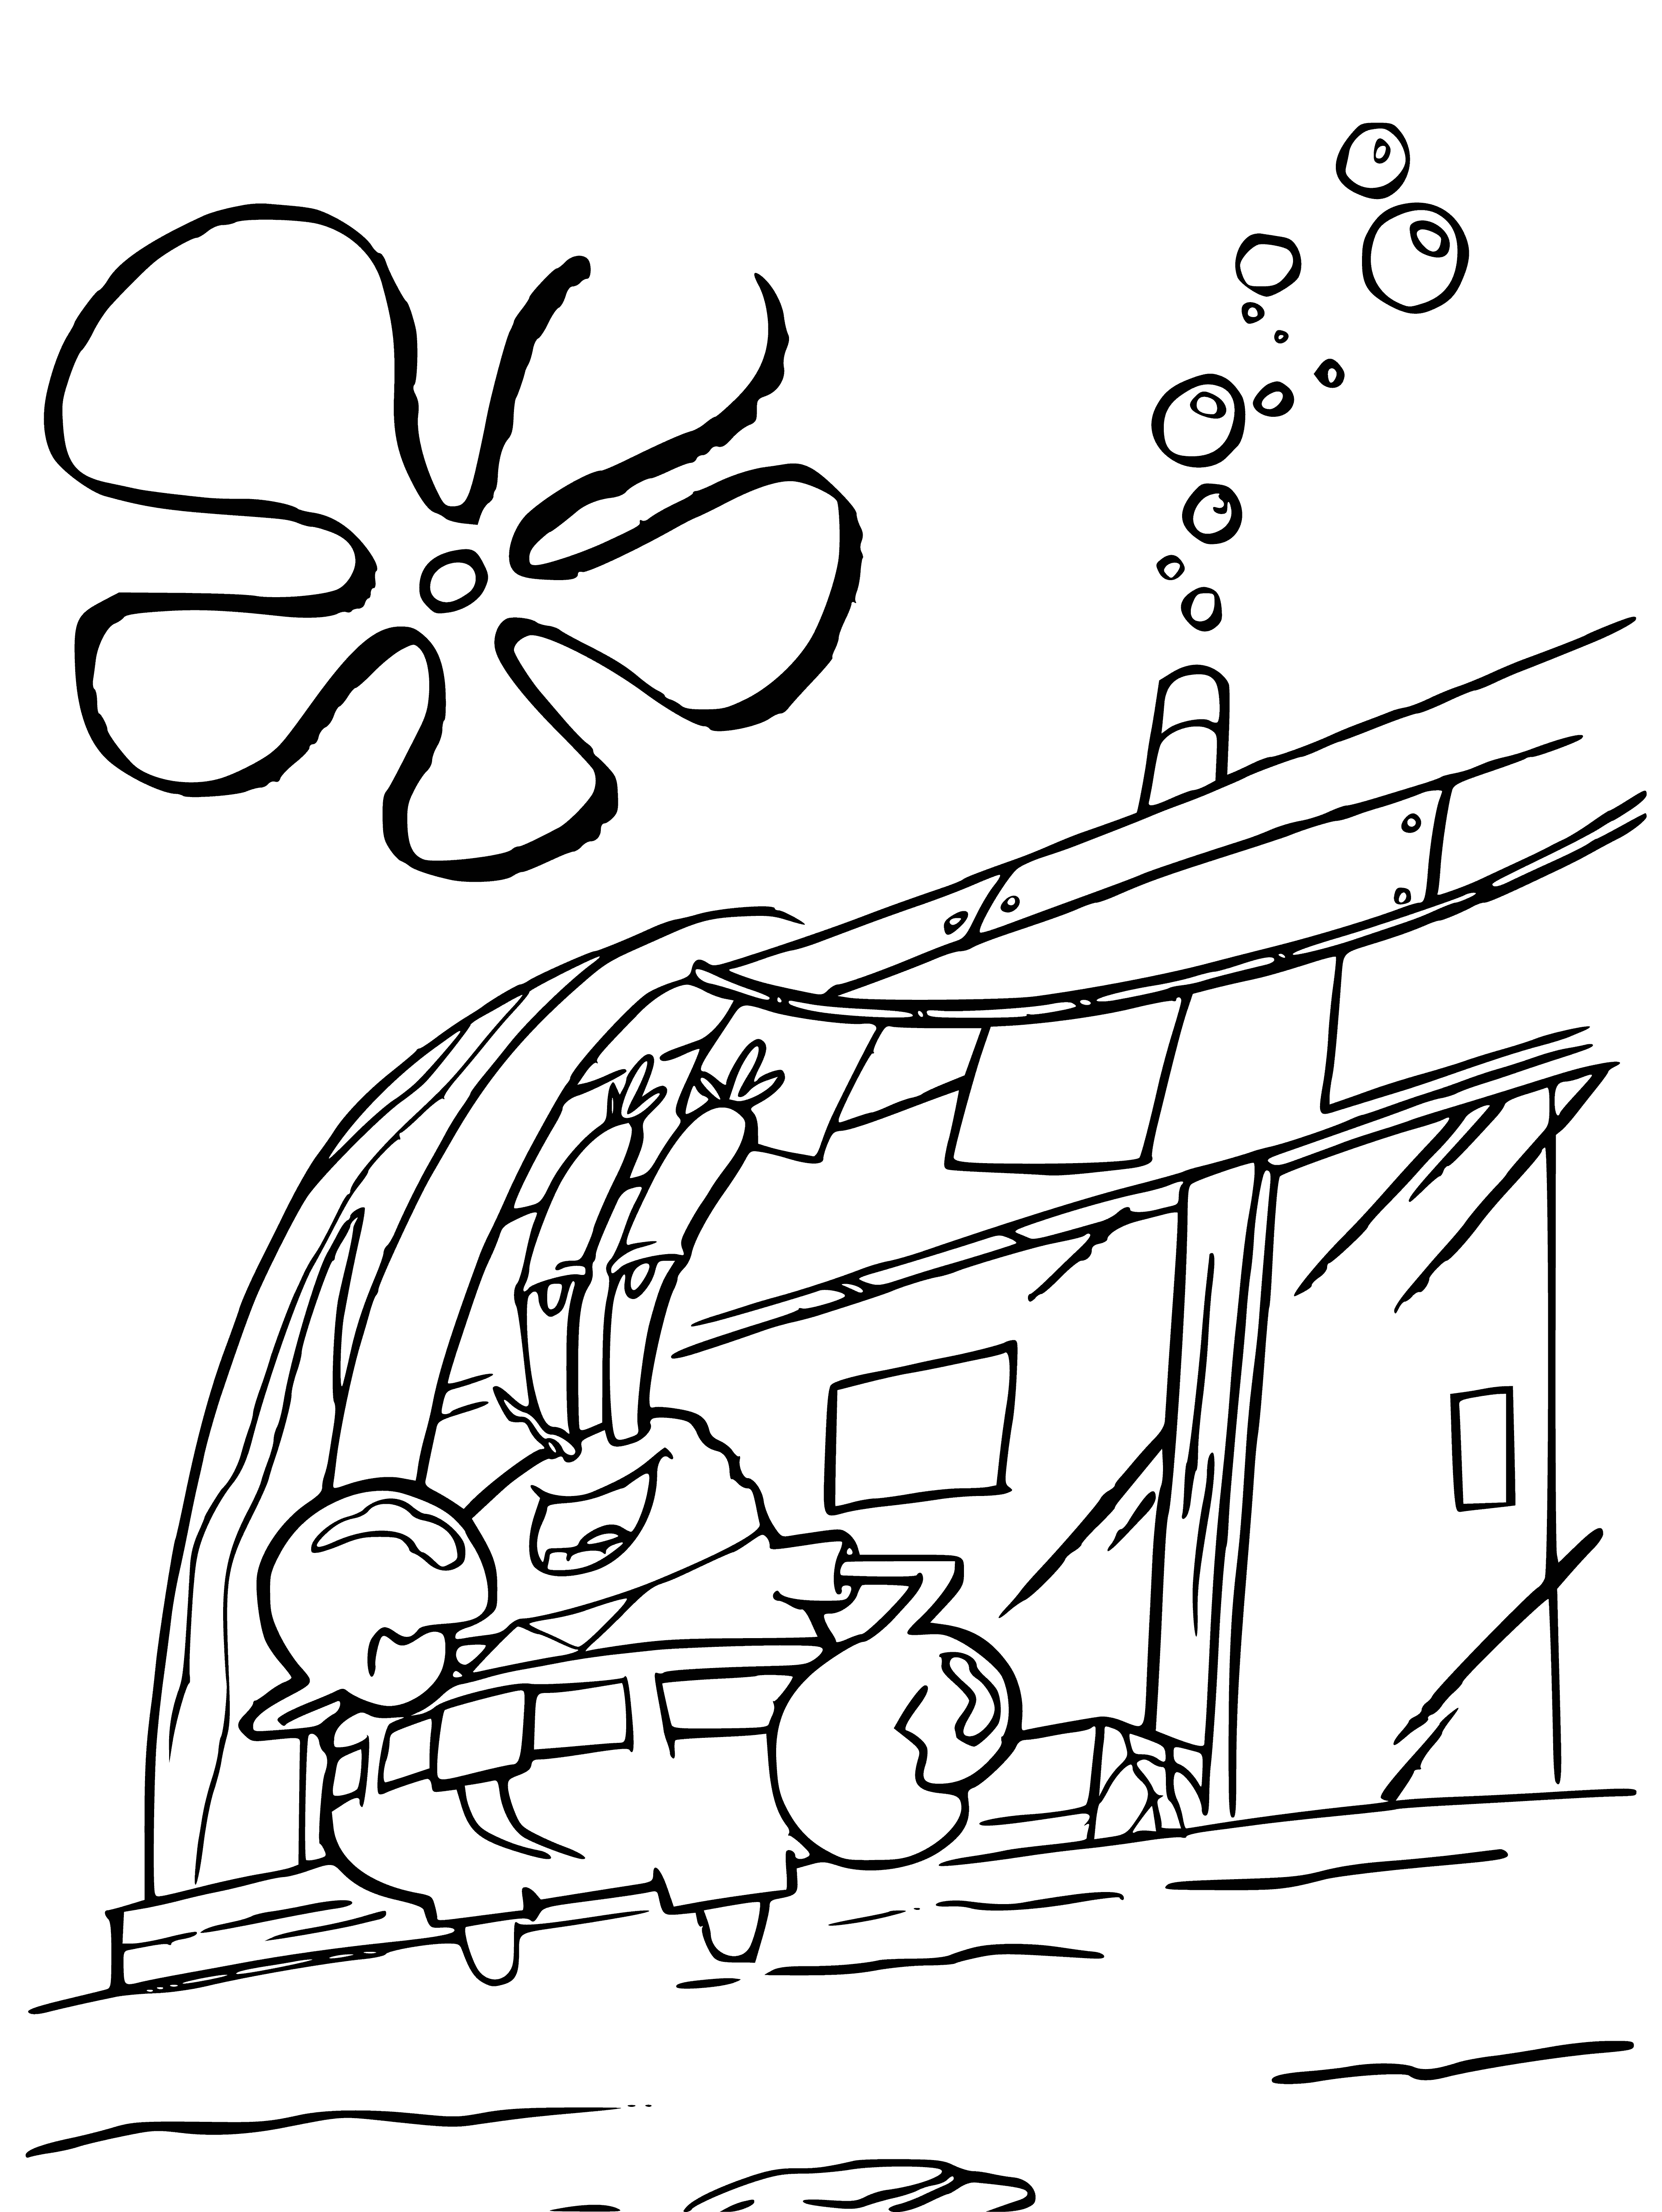 Everything is fine coloring page